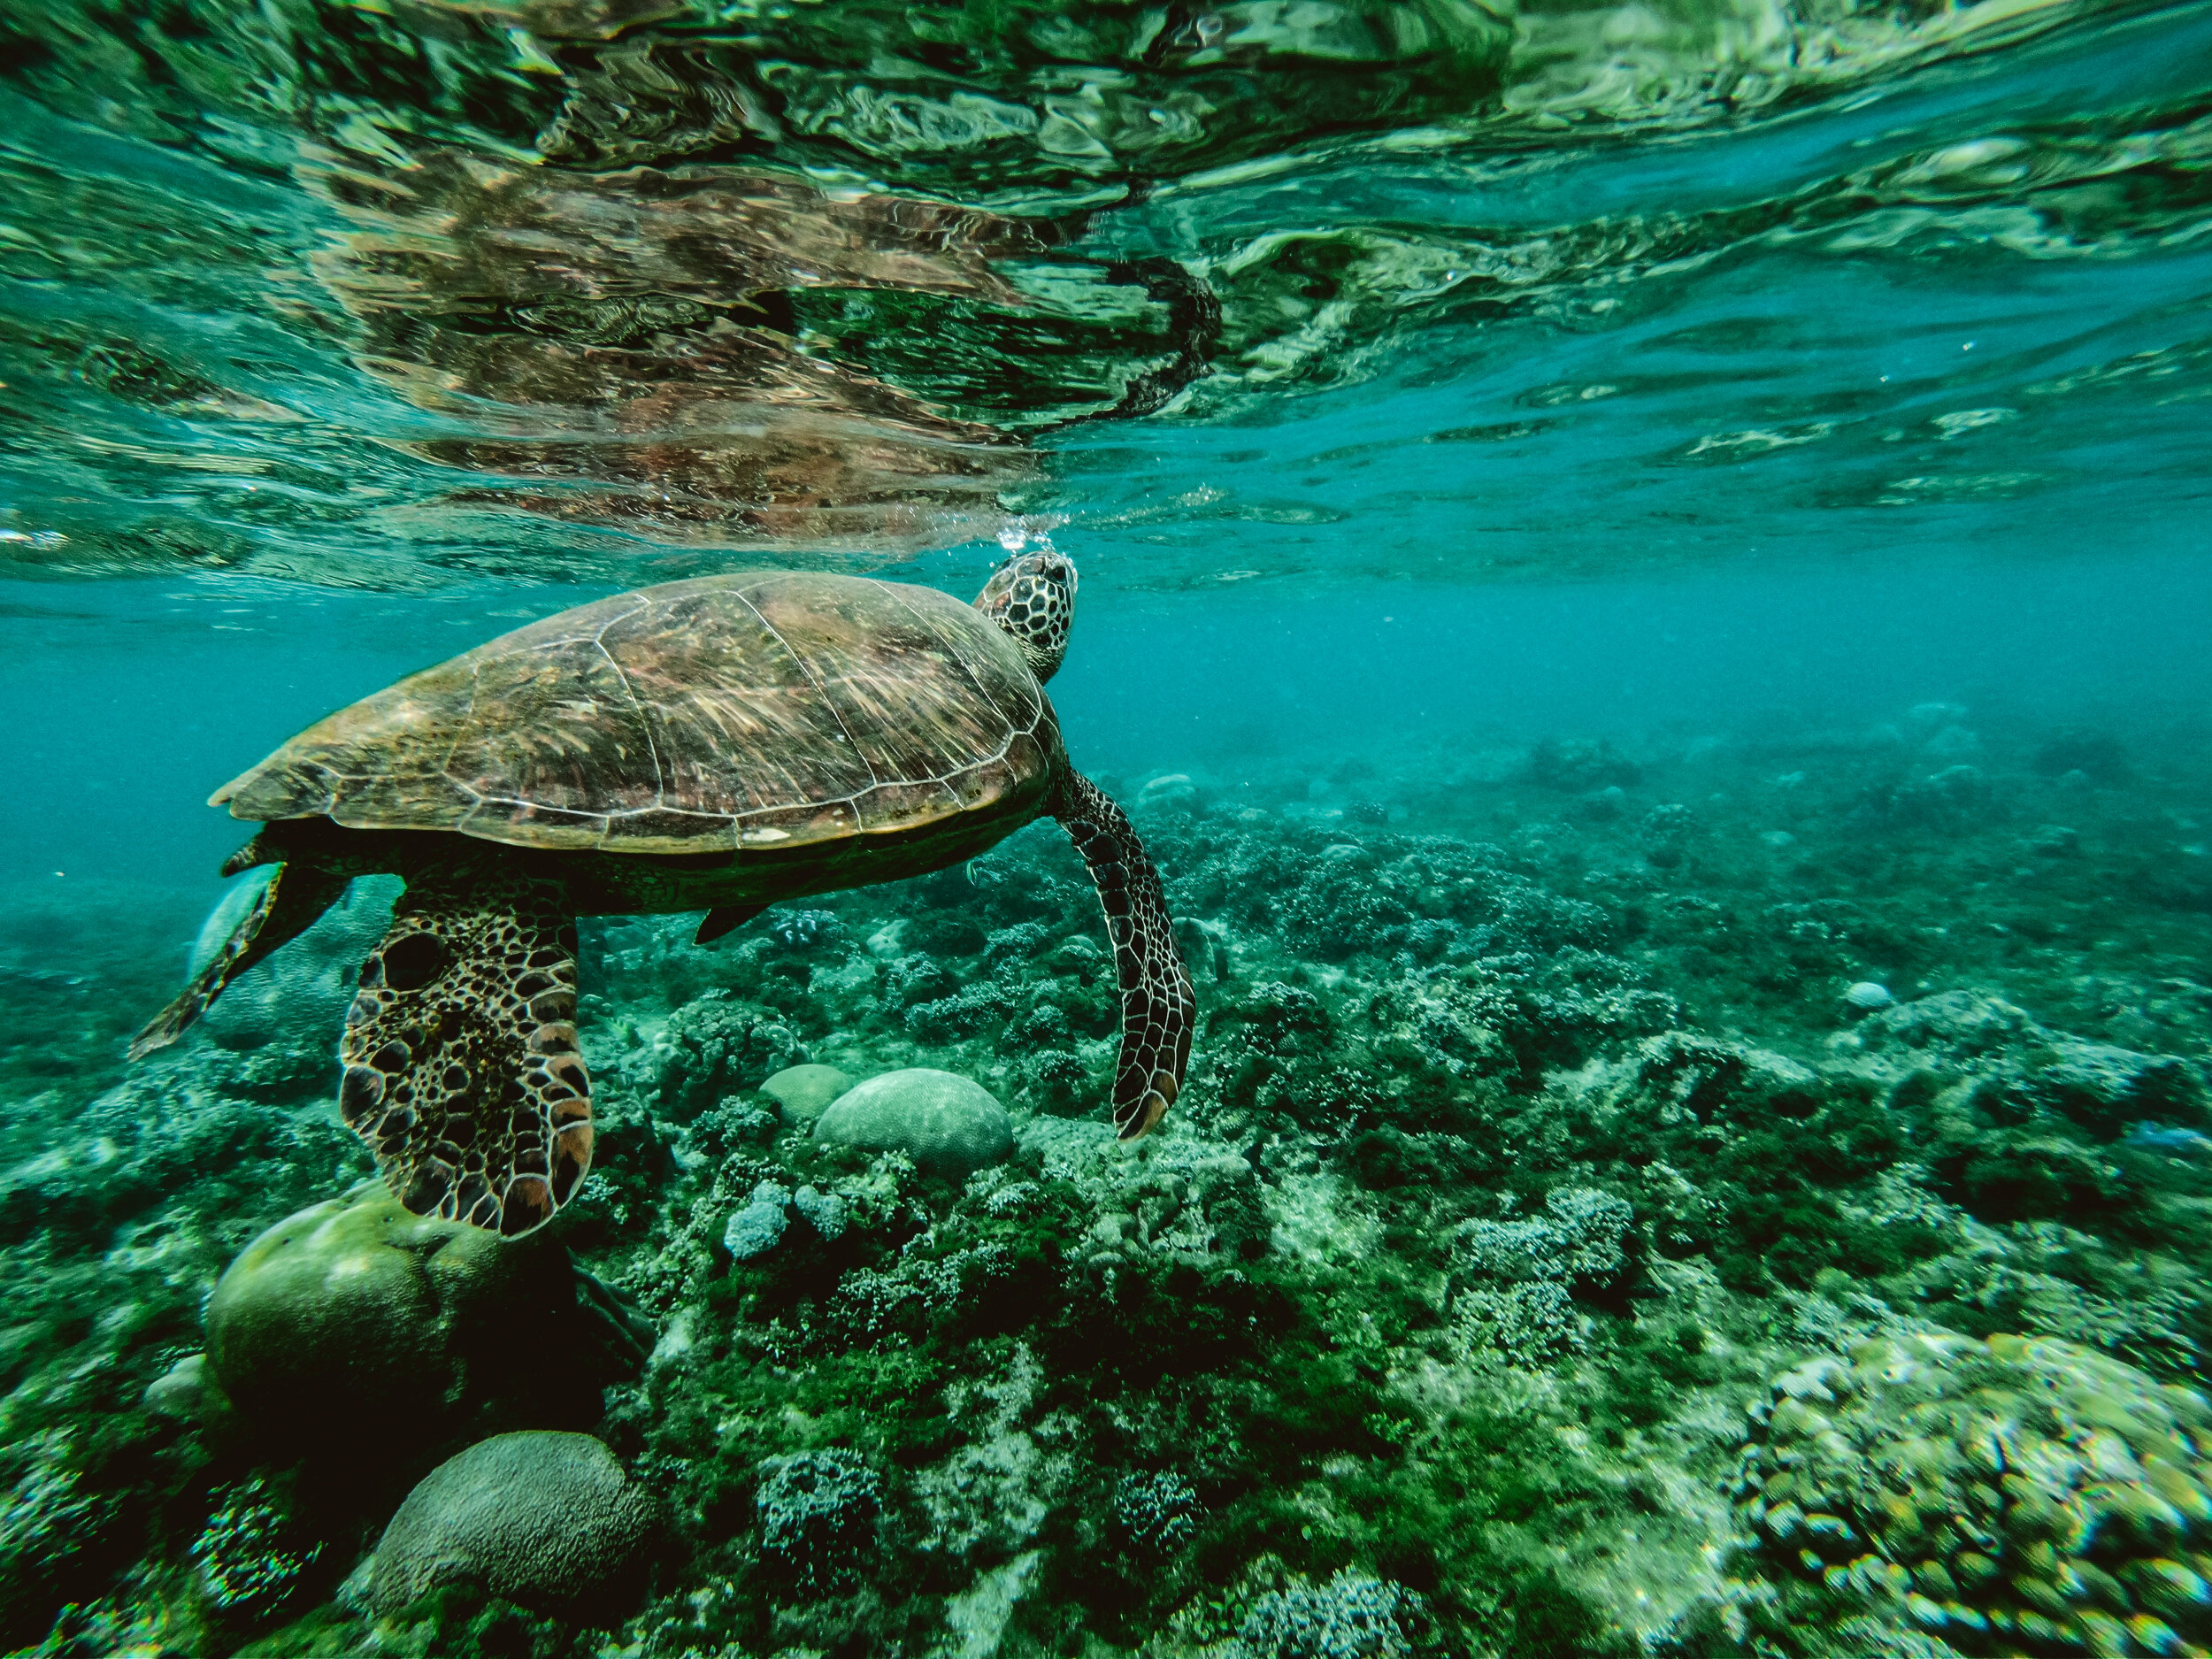 Canva - Photo of a Turtle Underwater.jpg